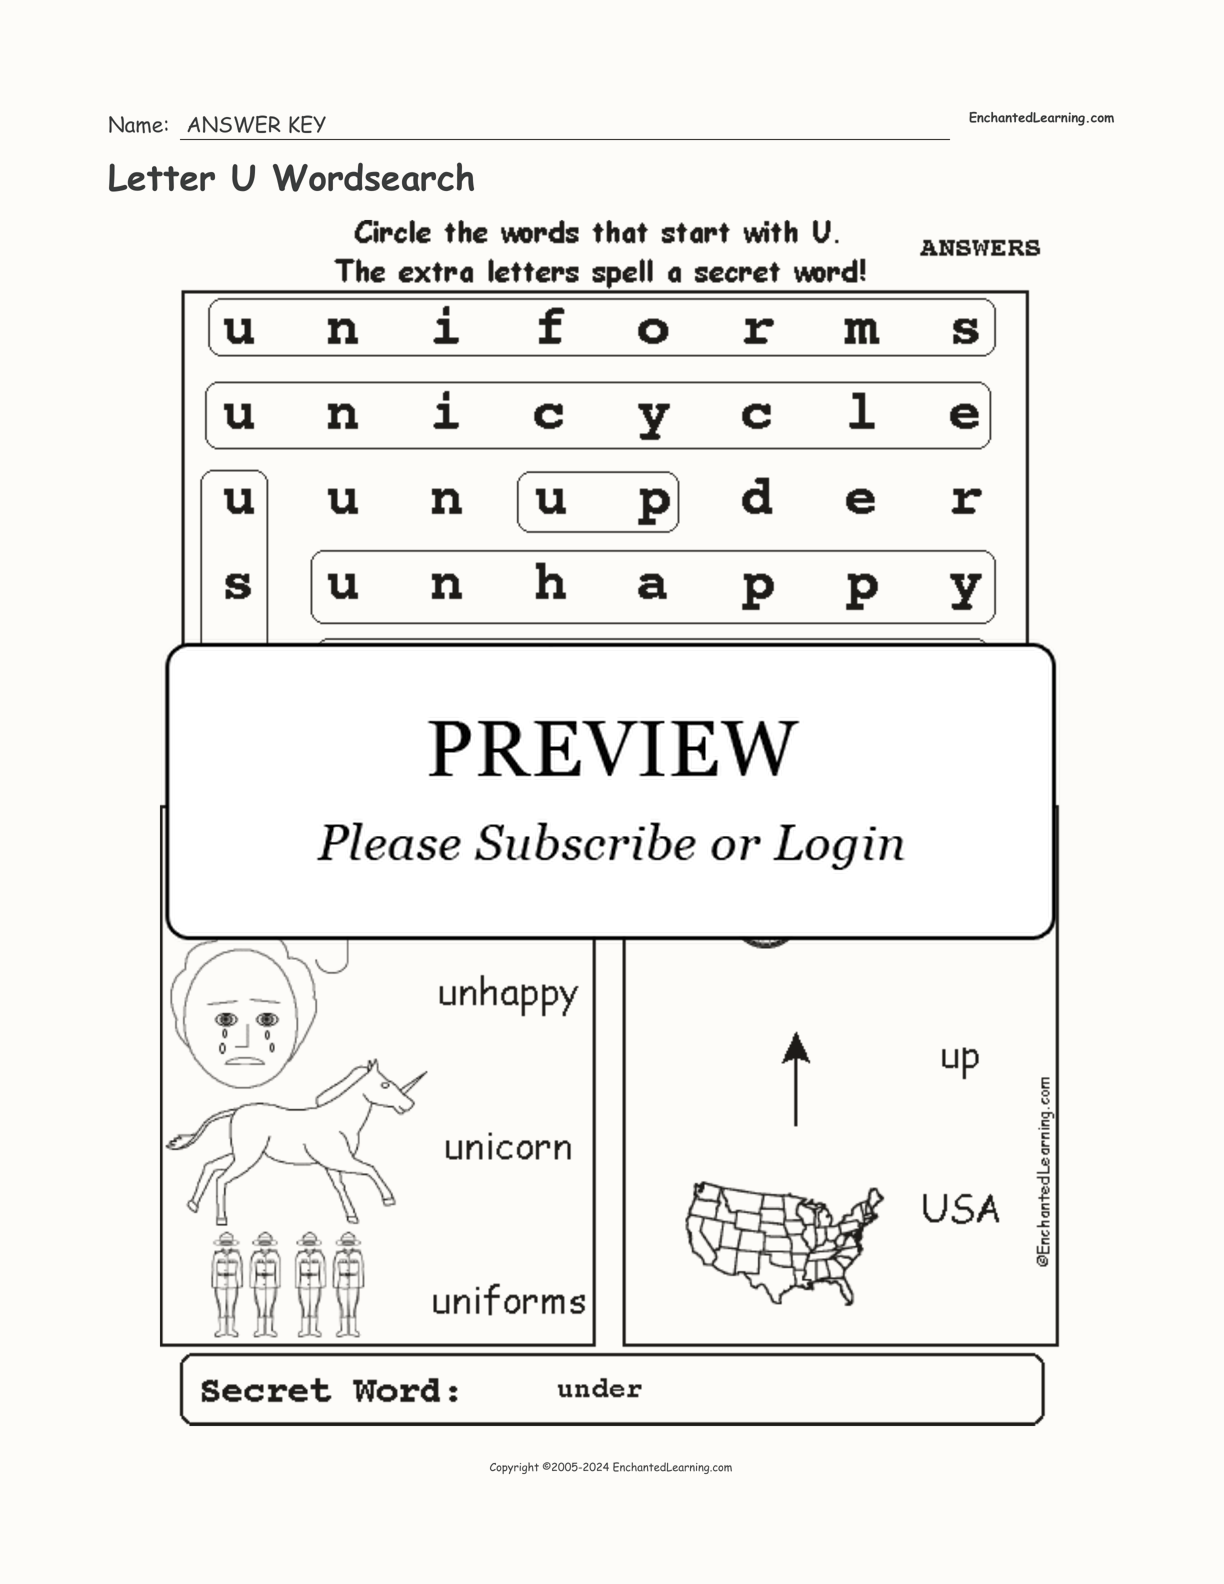 Letter U Wordsearch interactive worksheet page 2